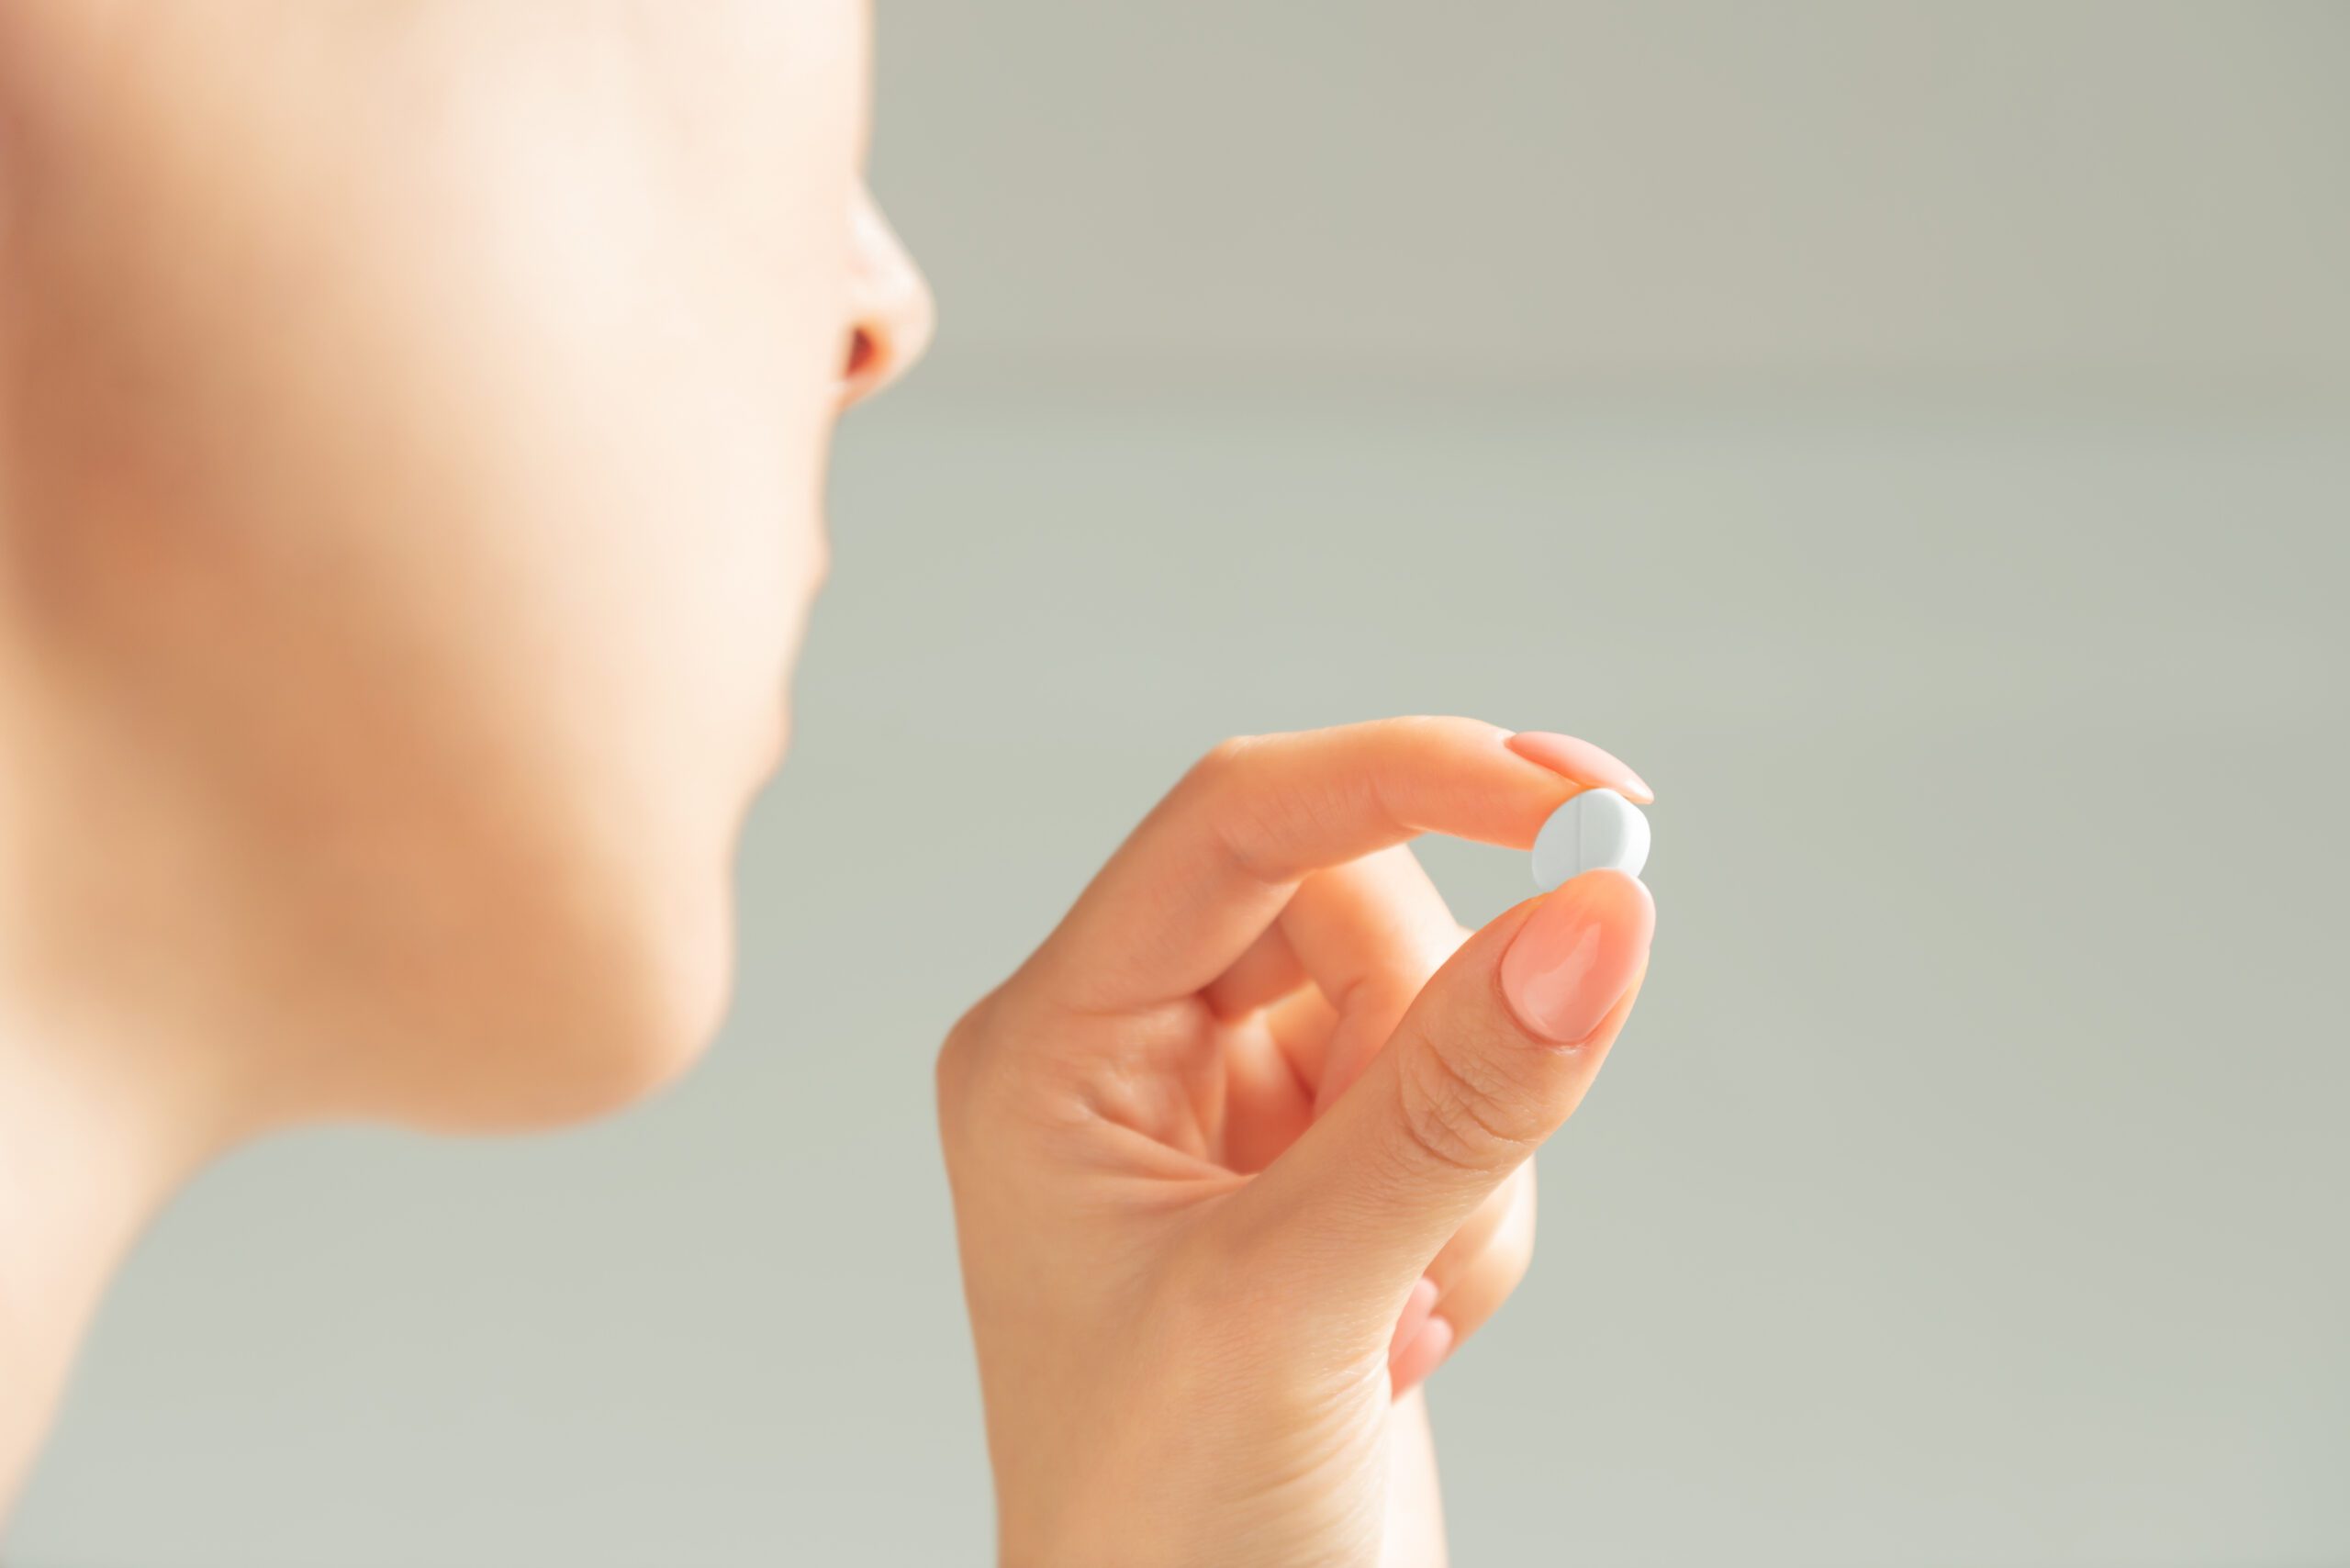 Woman considering taking the abortion pill